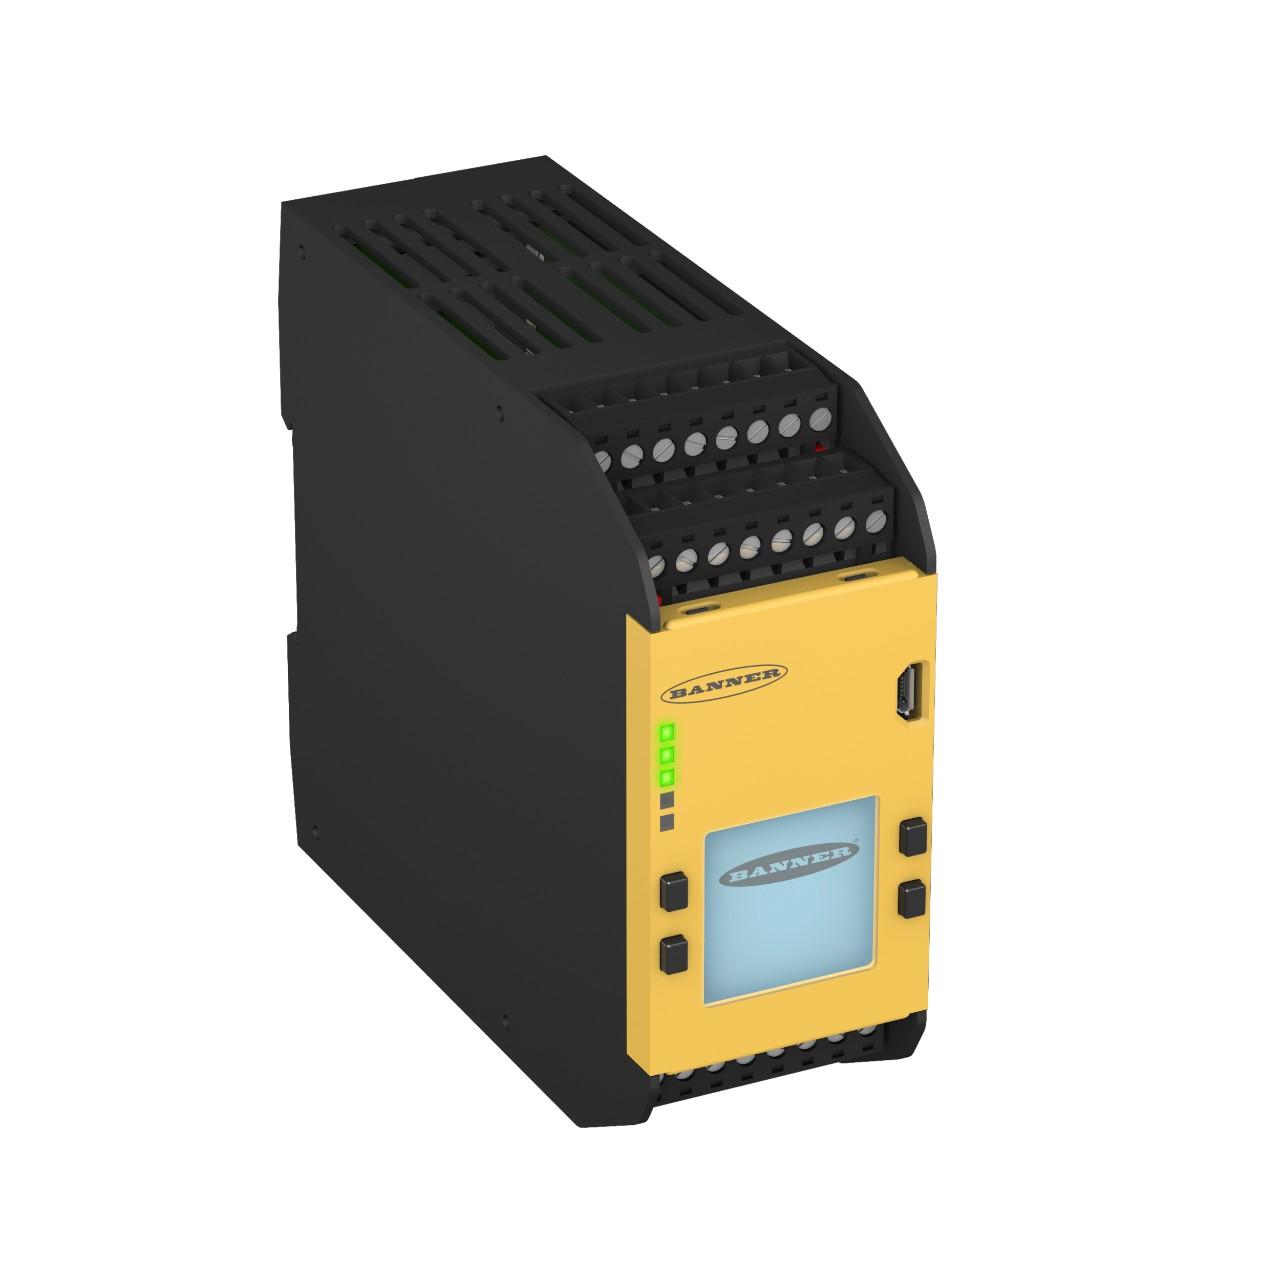 Banner XS26-2D XS26-2D Safety Controller: Expandable; 26 Input;, 2 pairs of PNP Safety Outputs (.5 Amp each); Display; No Ethernet, USB; 8 Convertible Inputs; Removable Screw Terminals, 24 V dc; 120 mA